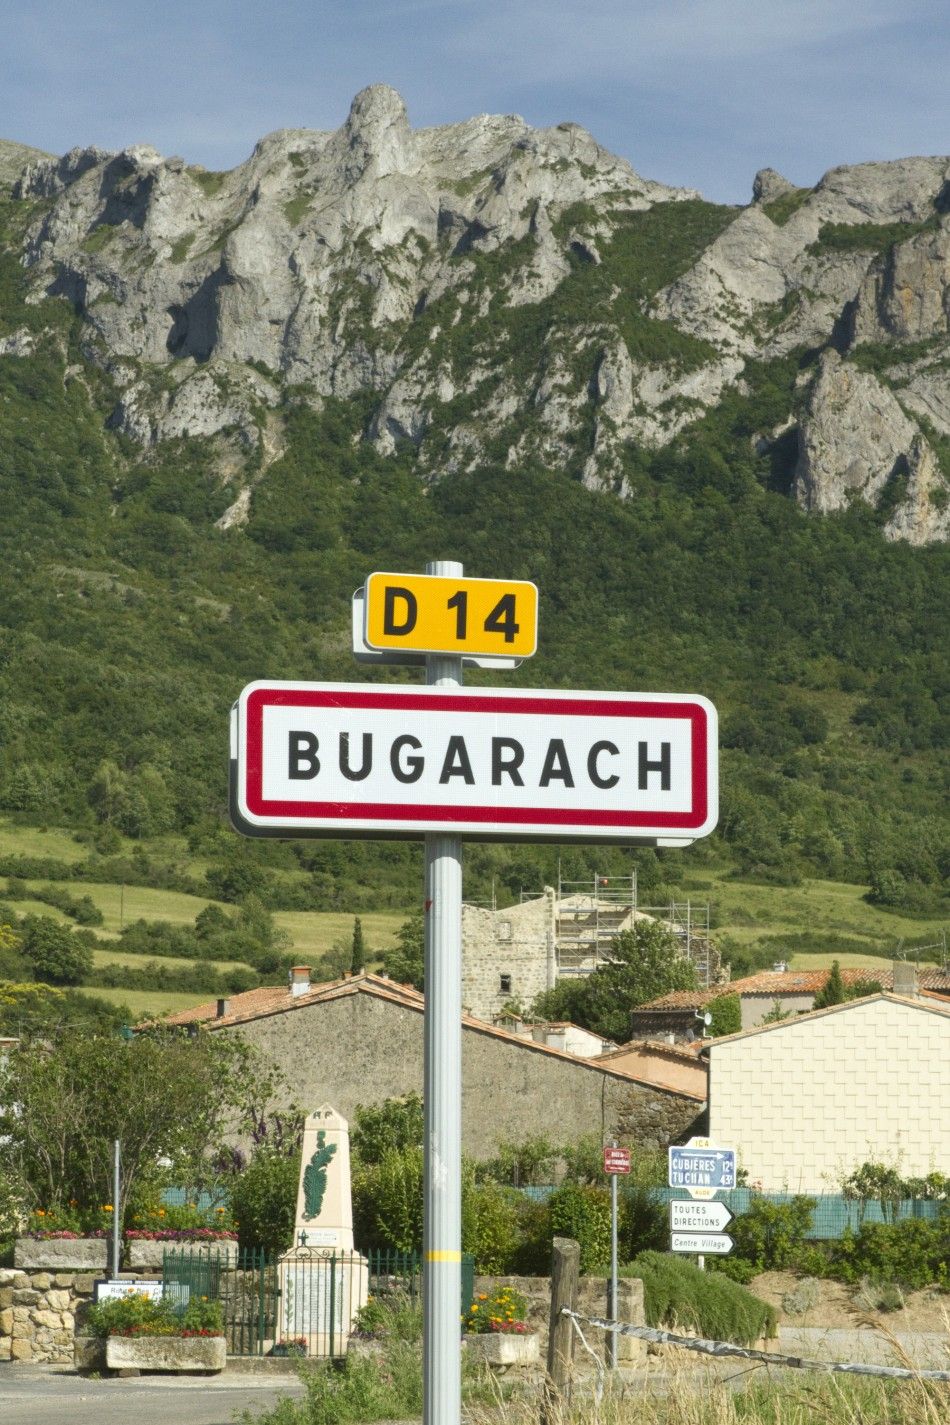 Bugarach to be Spared in 2012 Apocalypse